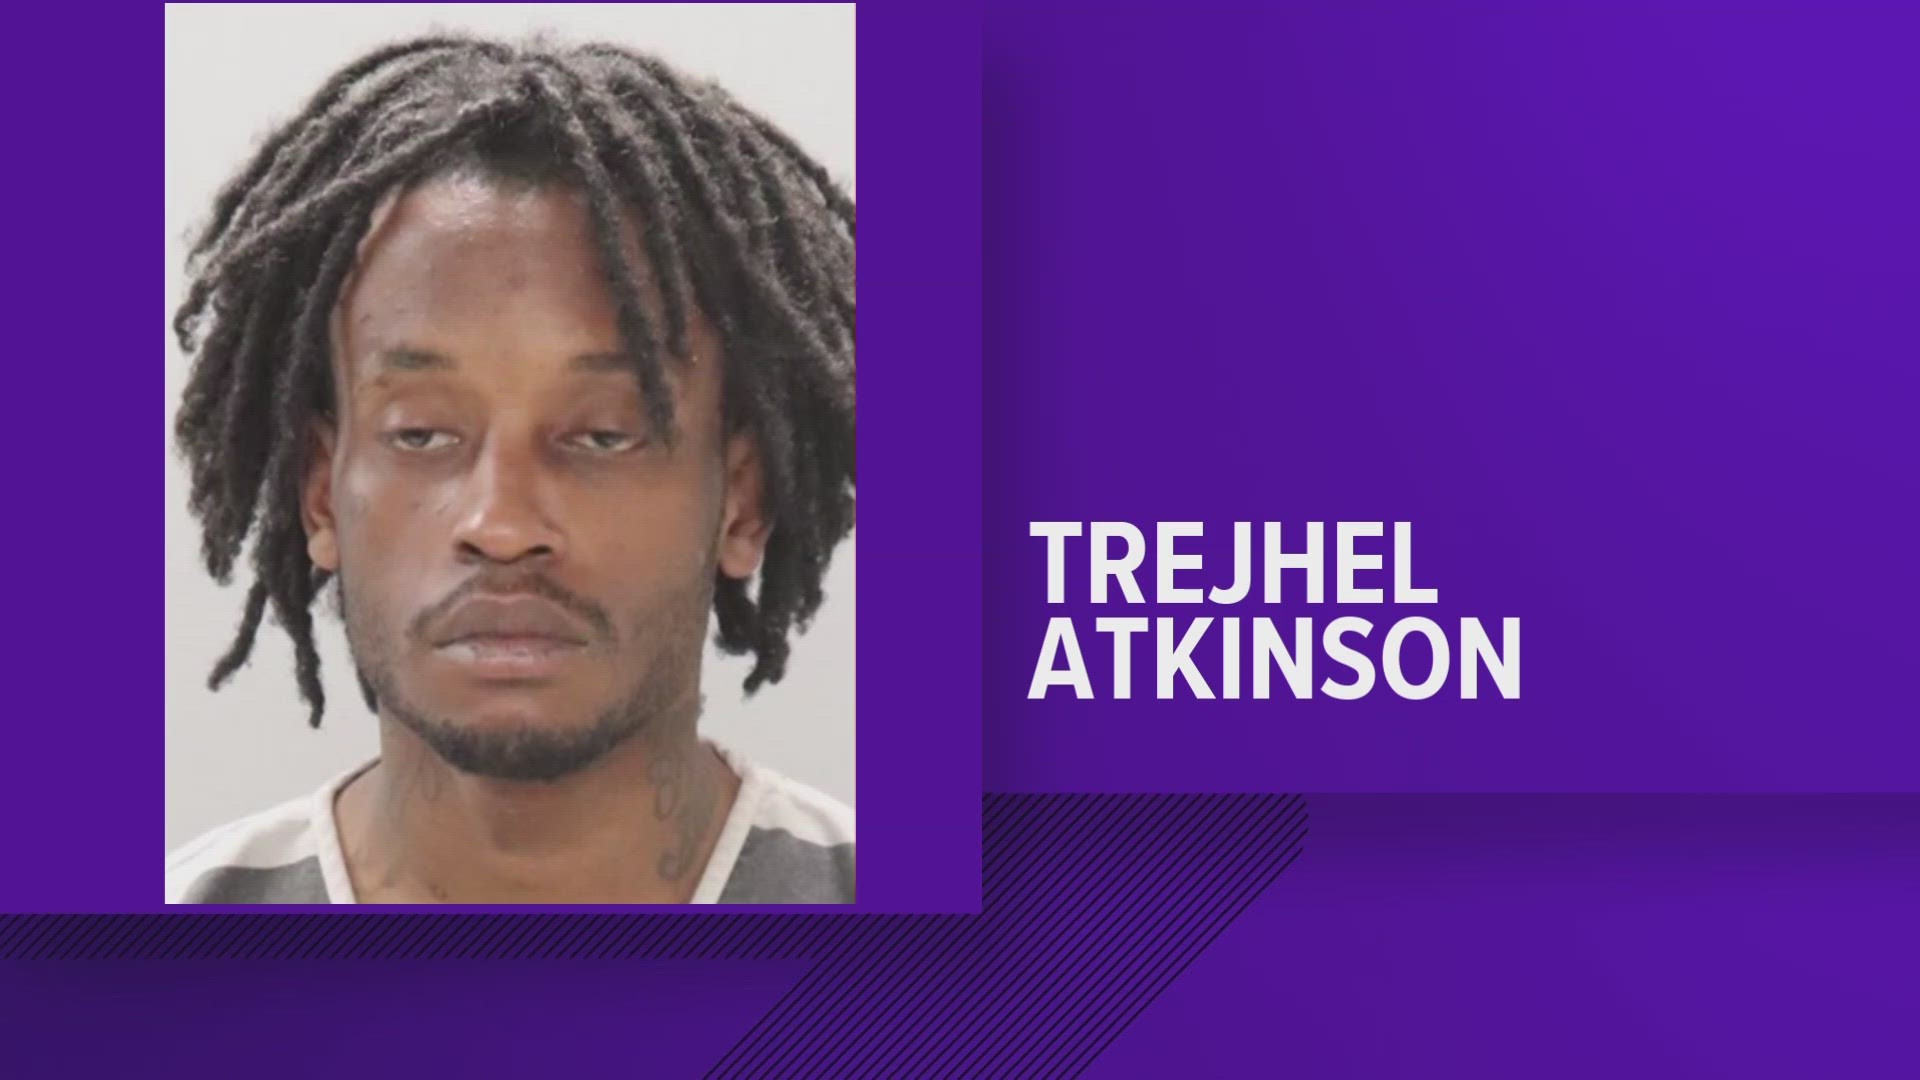 Knoxville Police arrested 23-year-old Trejhel Atkinson Friday evening. He is now facing multiple charges, including aggravated assault and evading arrest.